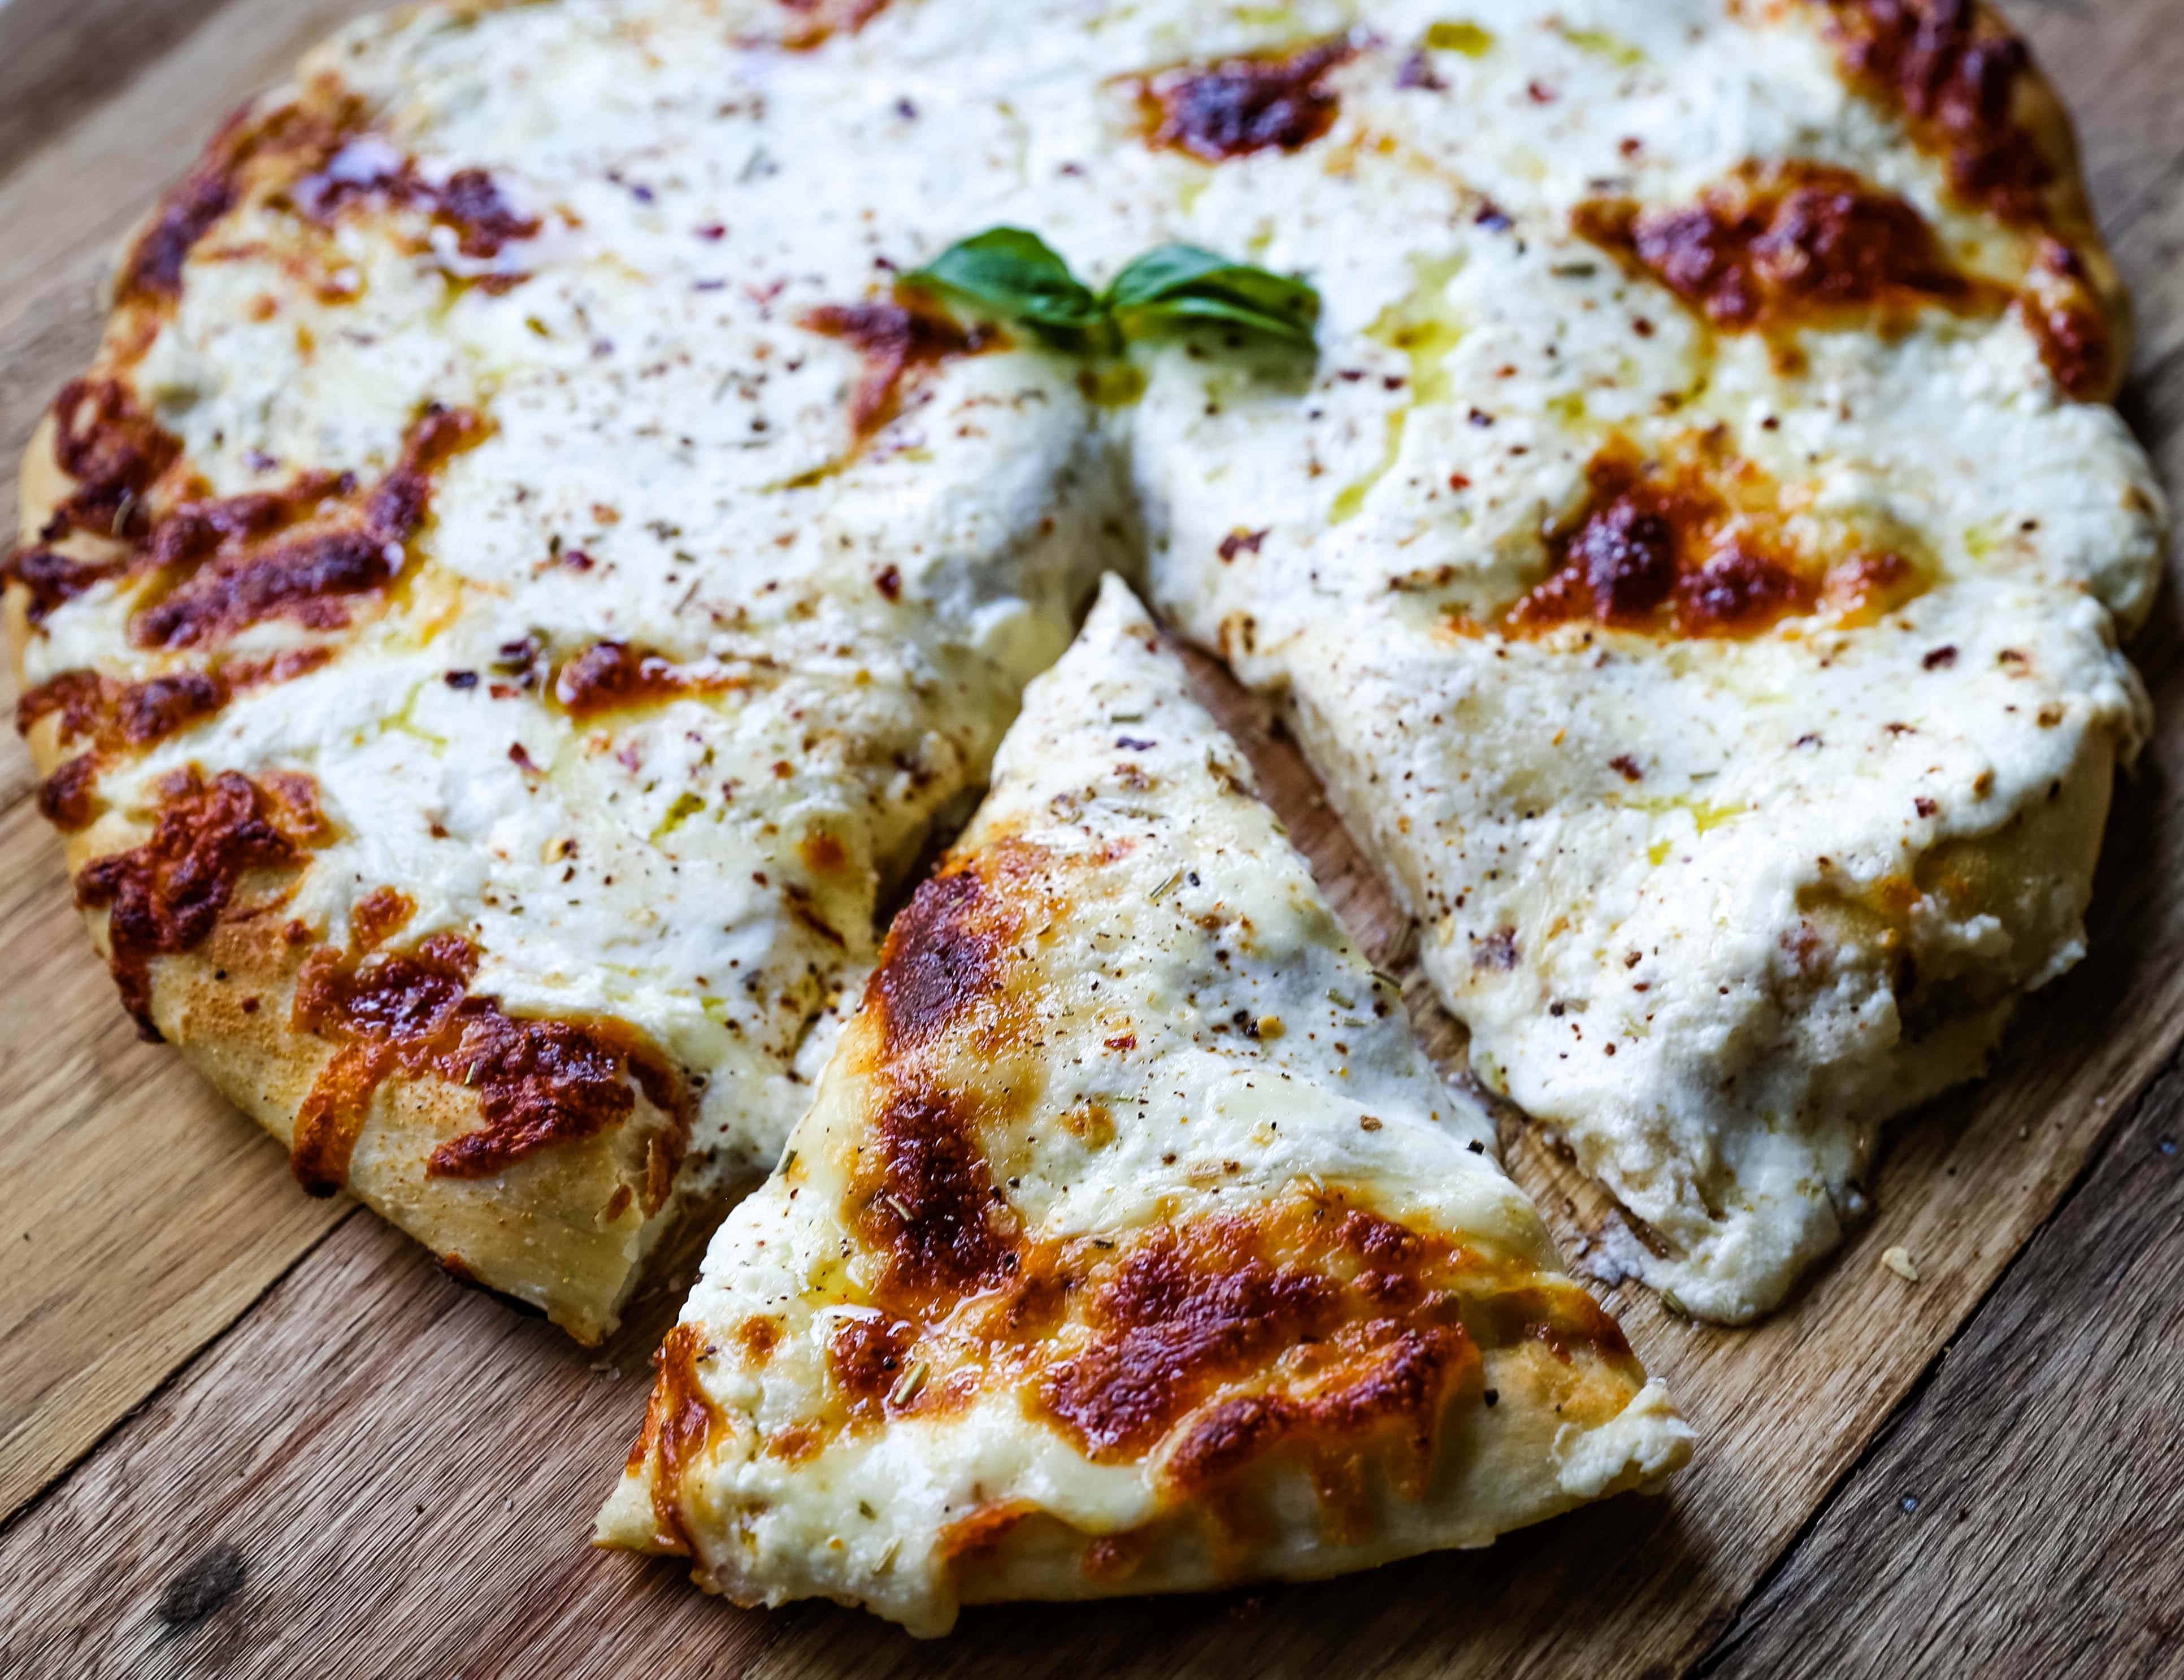 The Best 3-Cheese White Pizza A New-York Style white pizza with drizzled olive oil, mozzarella, parmesan, and ricotta cheese with Italian herbs. www.modernhoney.com #pizzabianca #whitepizza #pizza 